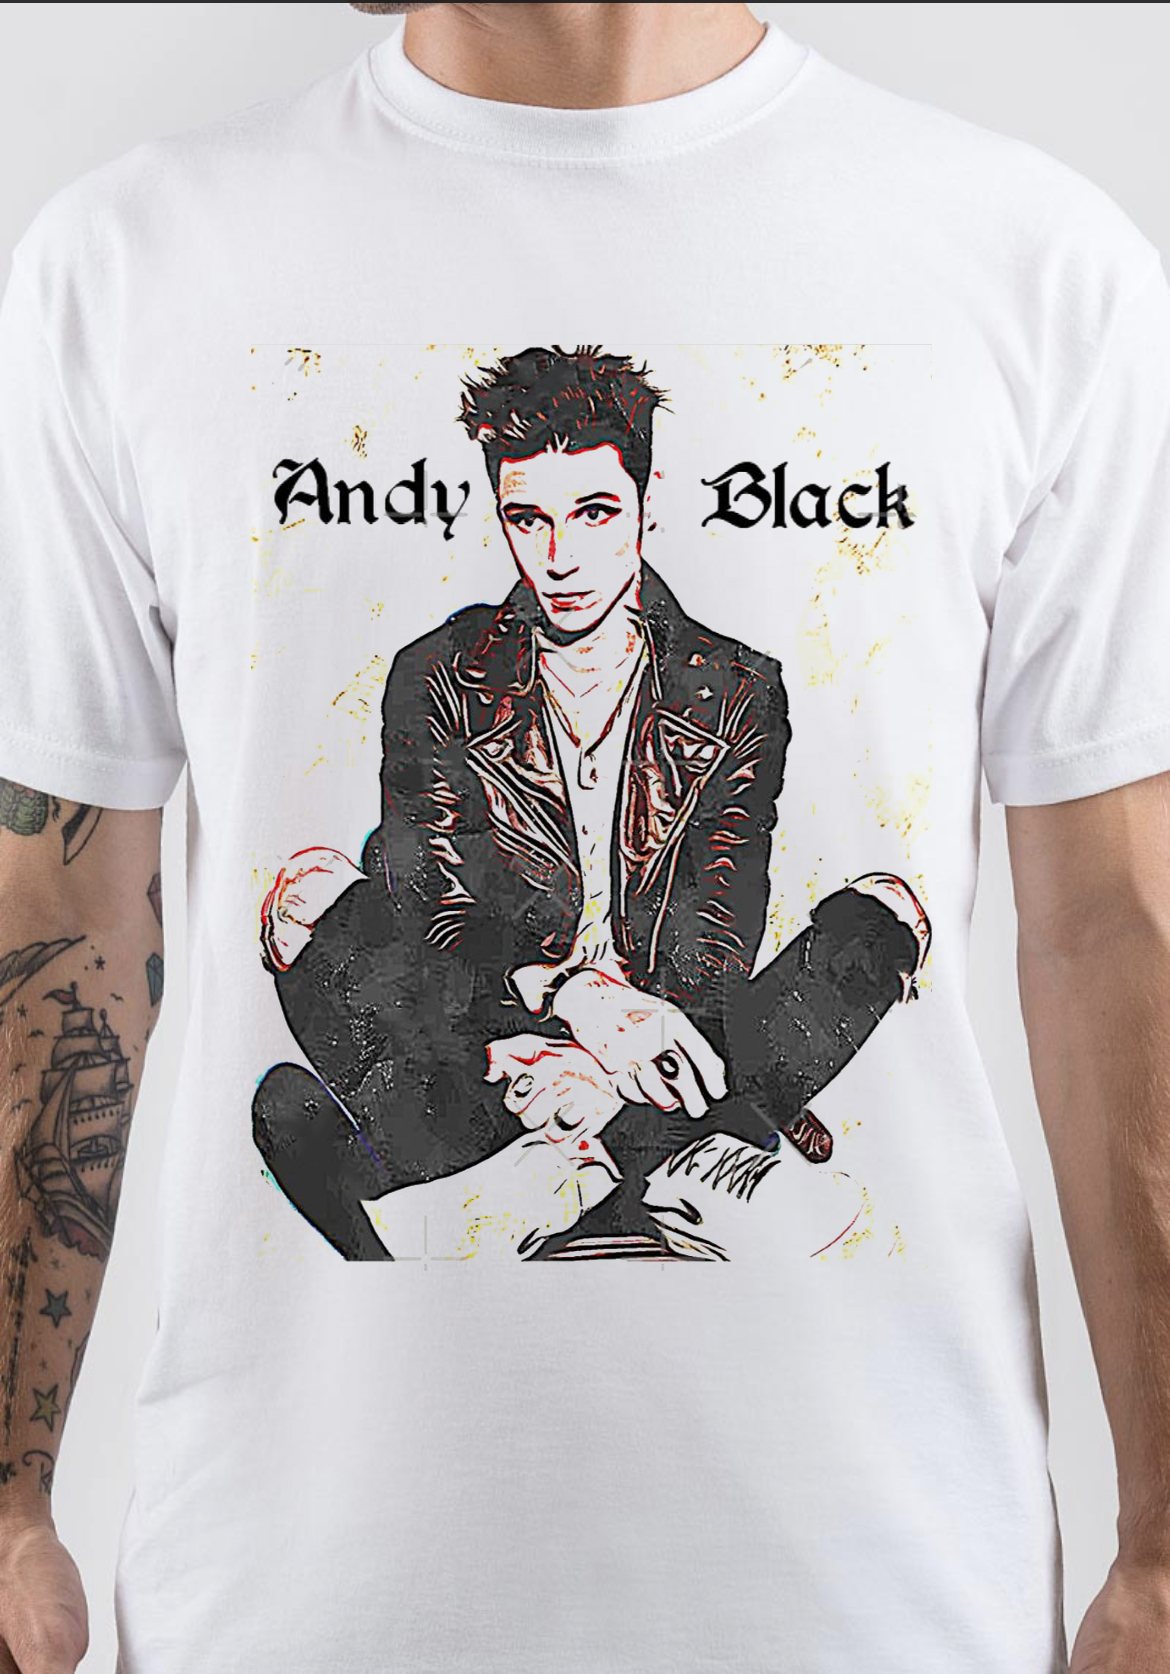 Andy Biersack T-Shirt And Merchandise